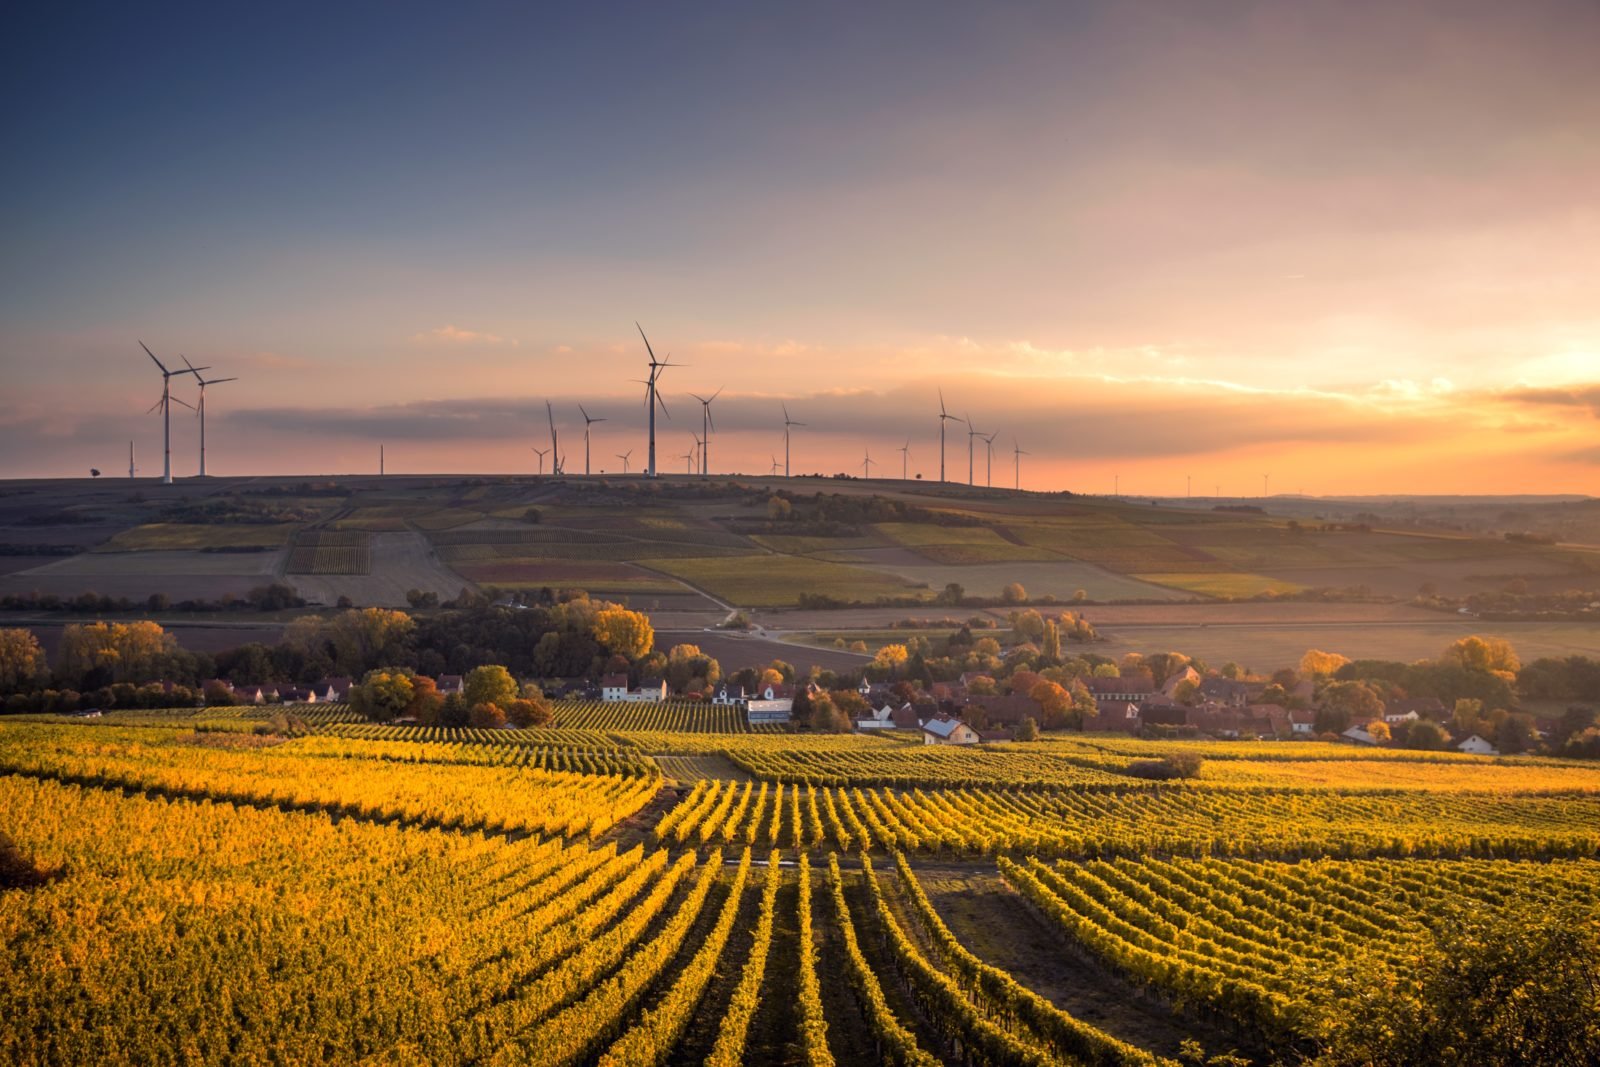 Sunset picture of wind farm in distance with fields of crops in the foreground